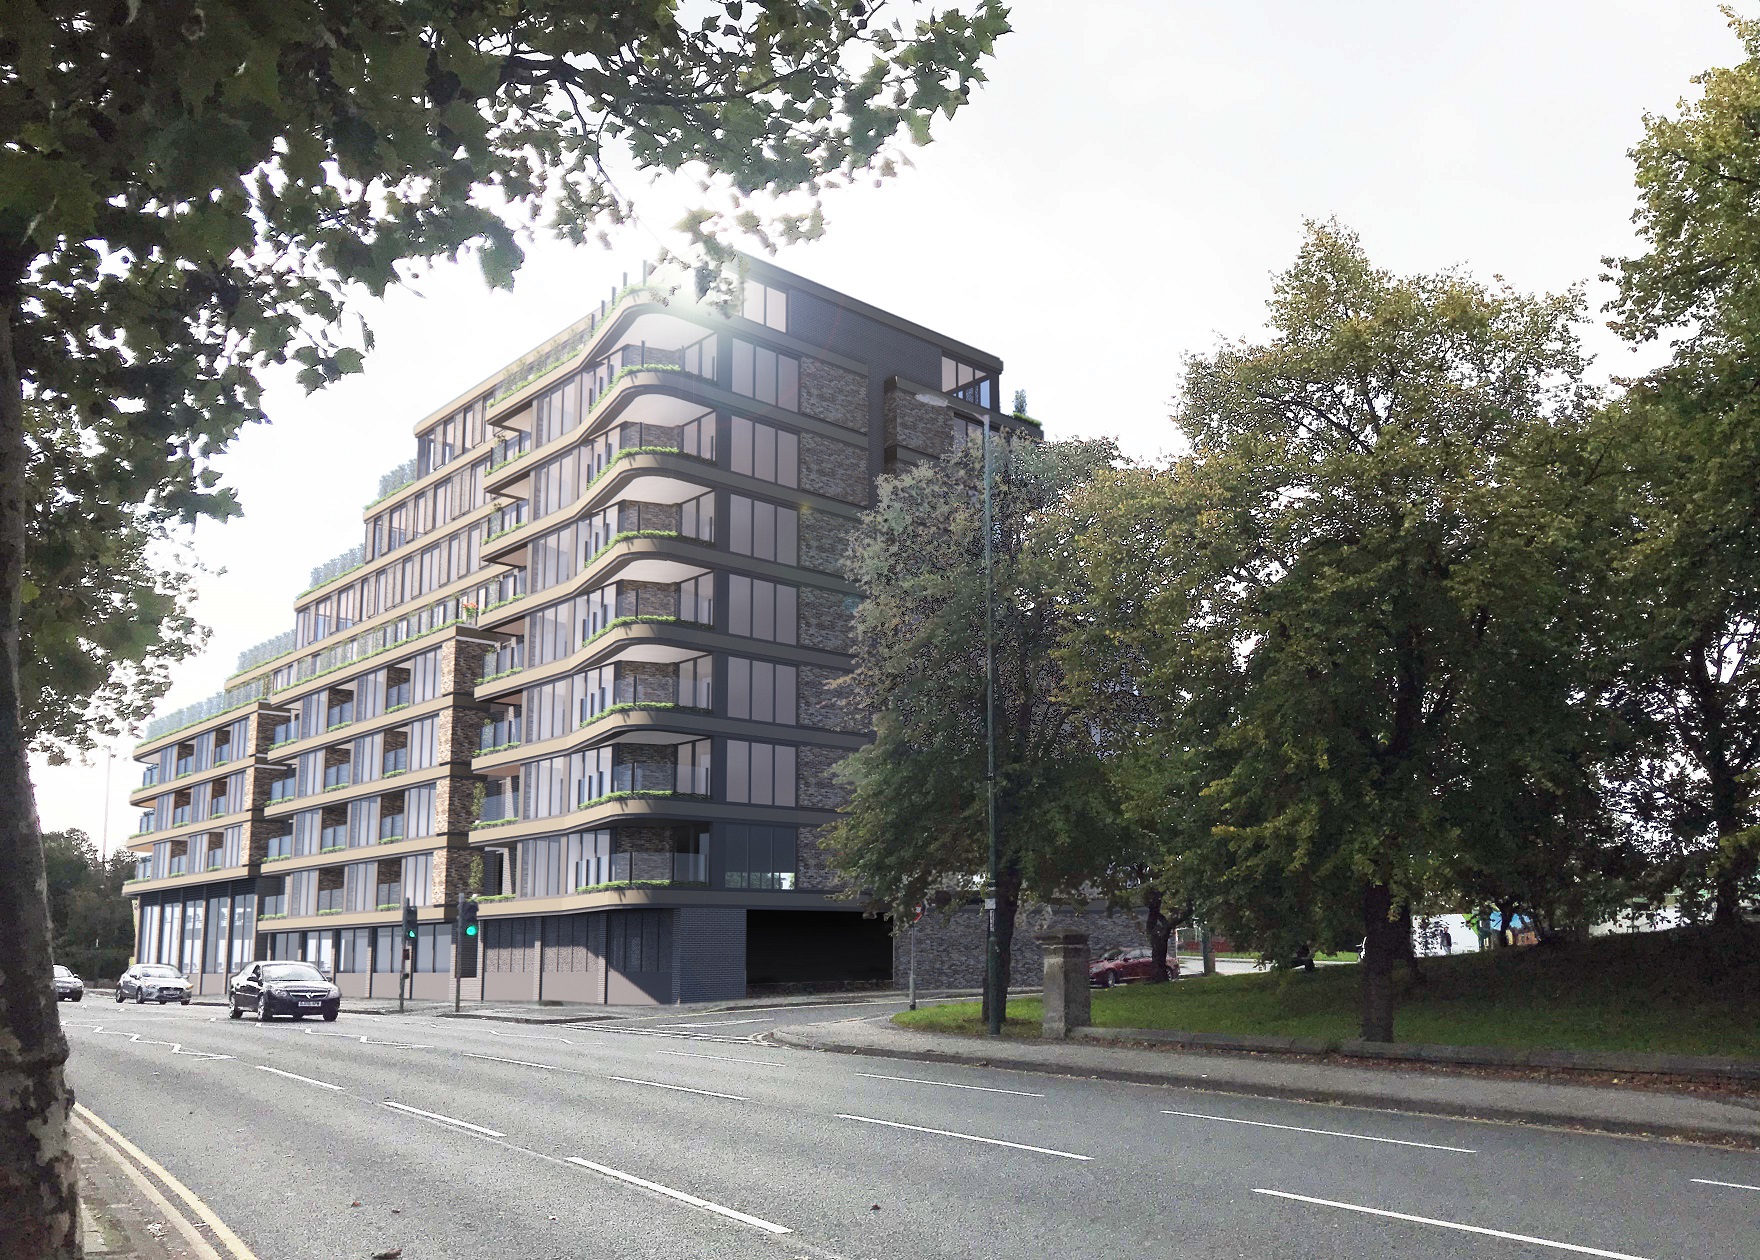 Plans submitted for Landmark London Road scheme in Nottingham complete with exterior living walls @ALBNottingham